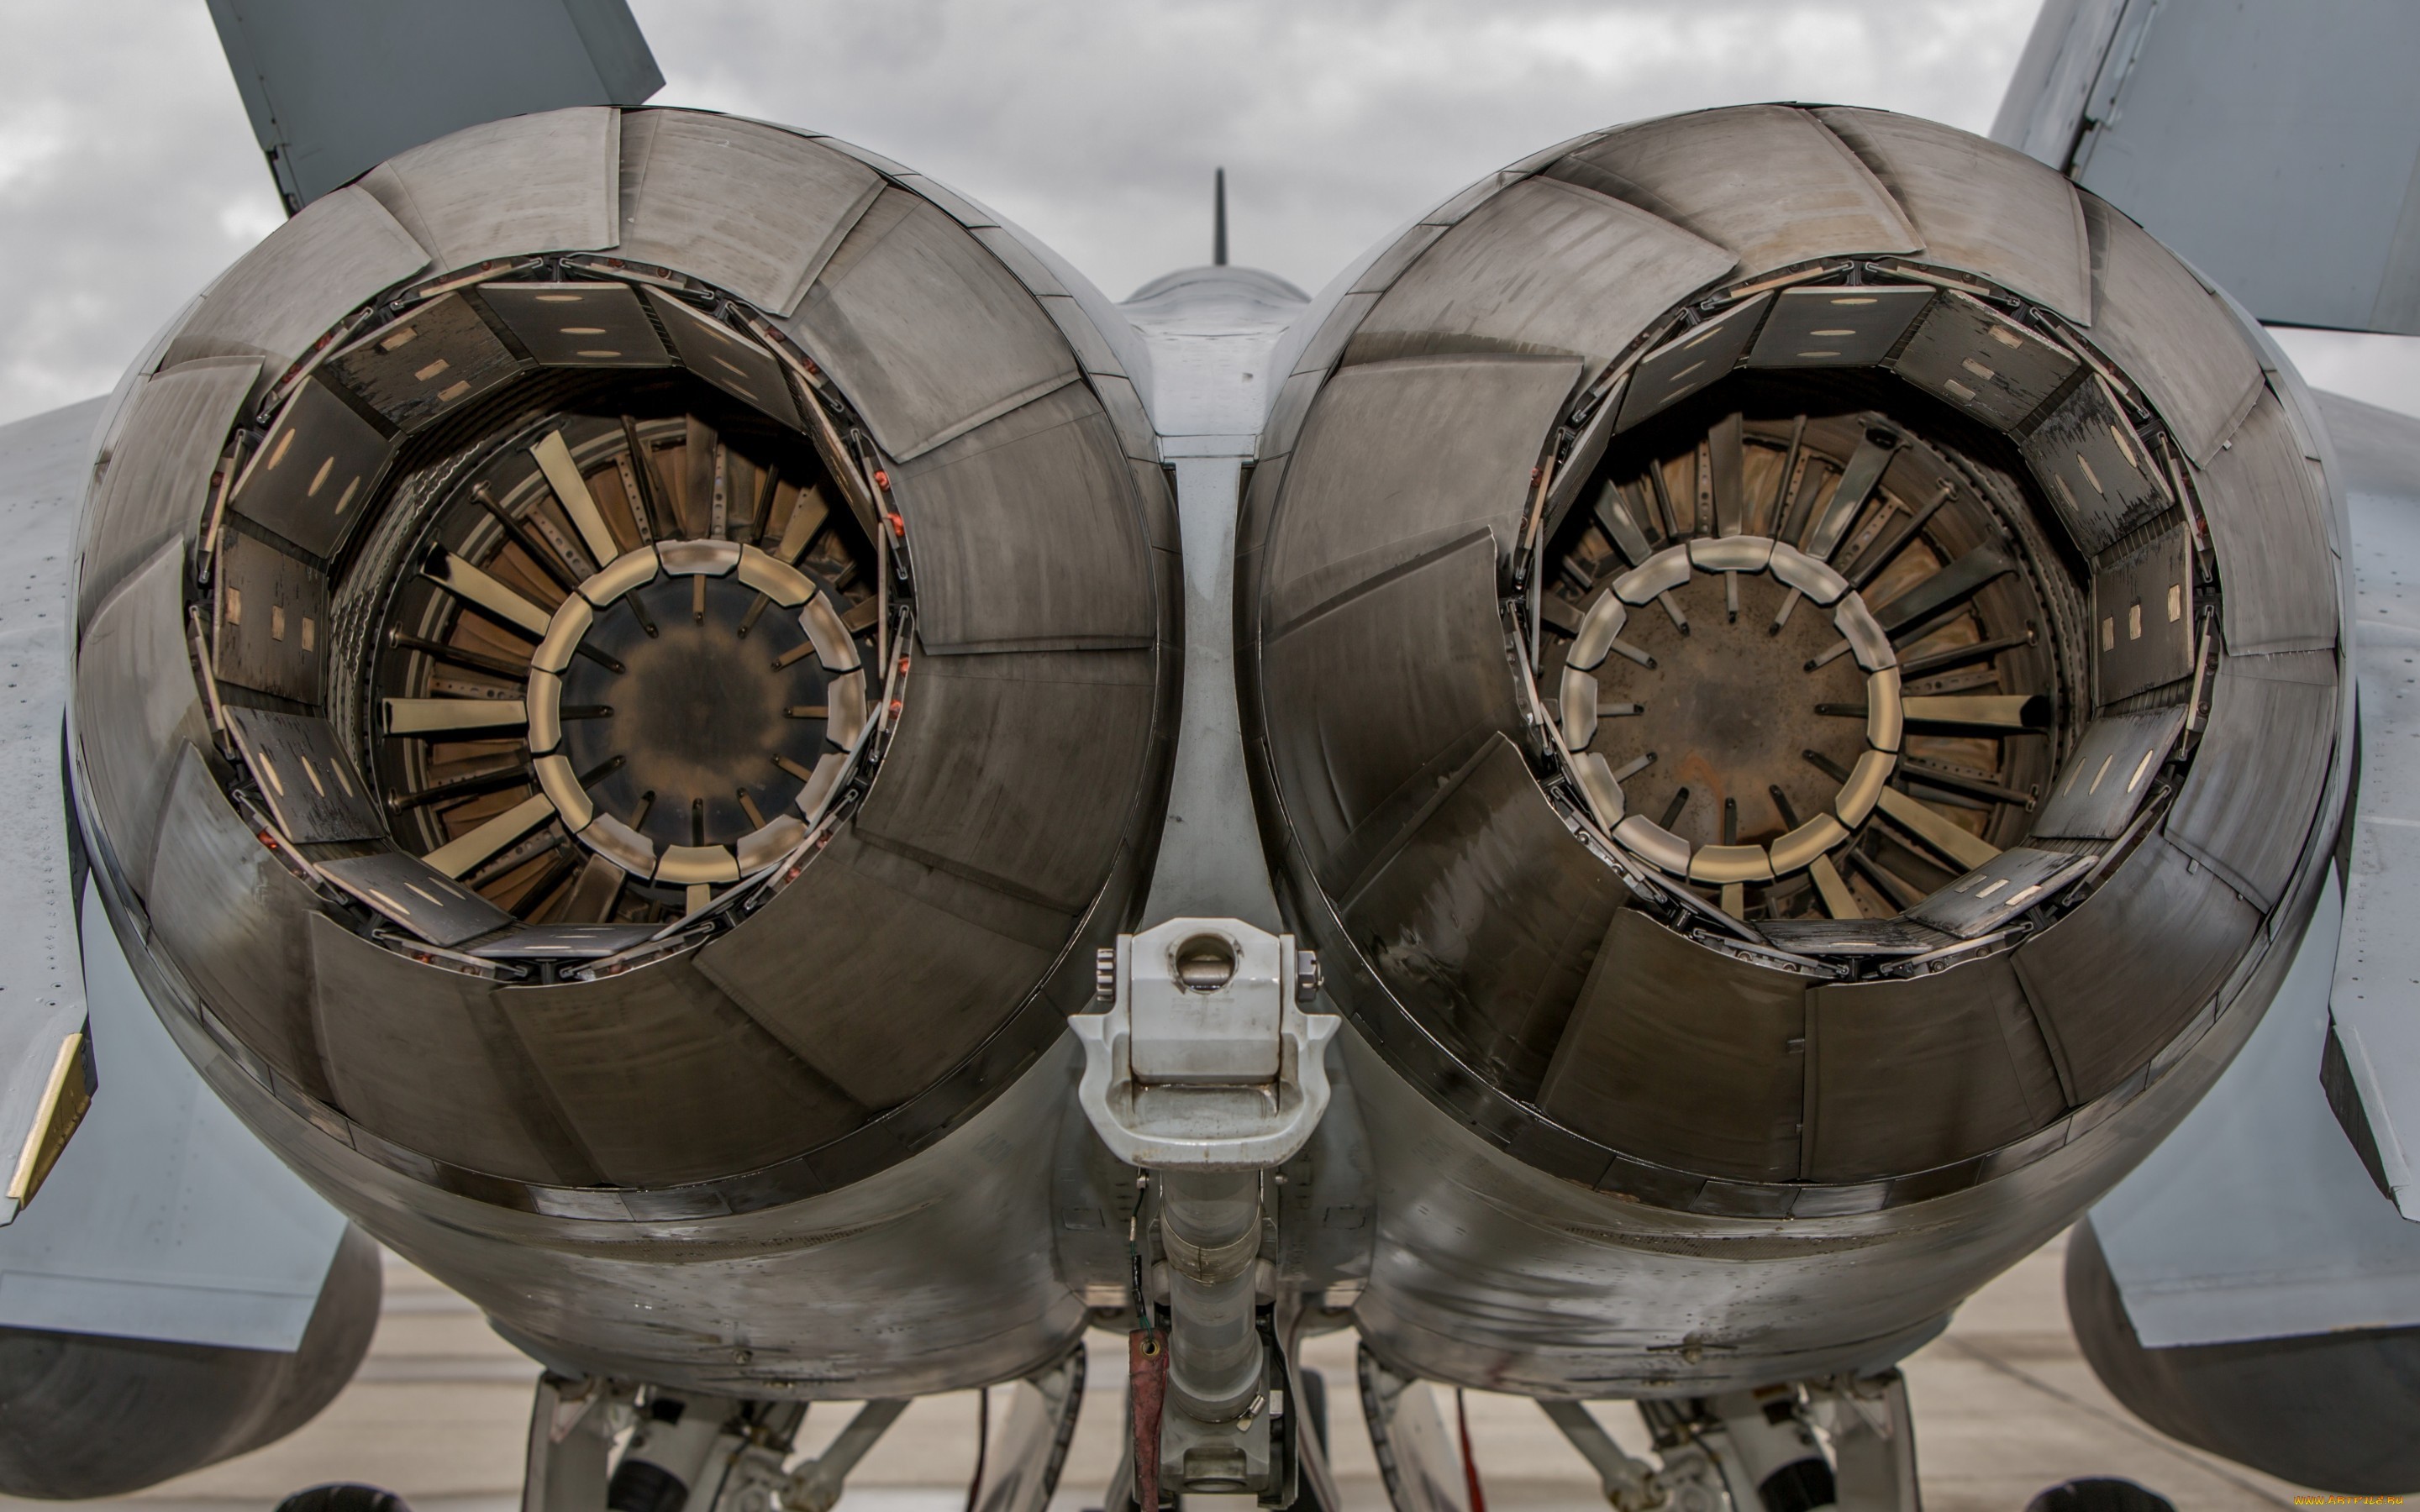 General 2880x1800 McDonnell Douglas F/A-18 Hornet turbines military aircraft vehicle military vehicle American aircraft military aircraft McDonnell Douglas rear view